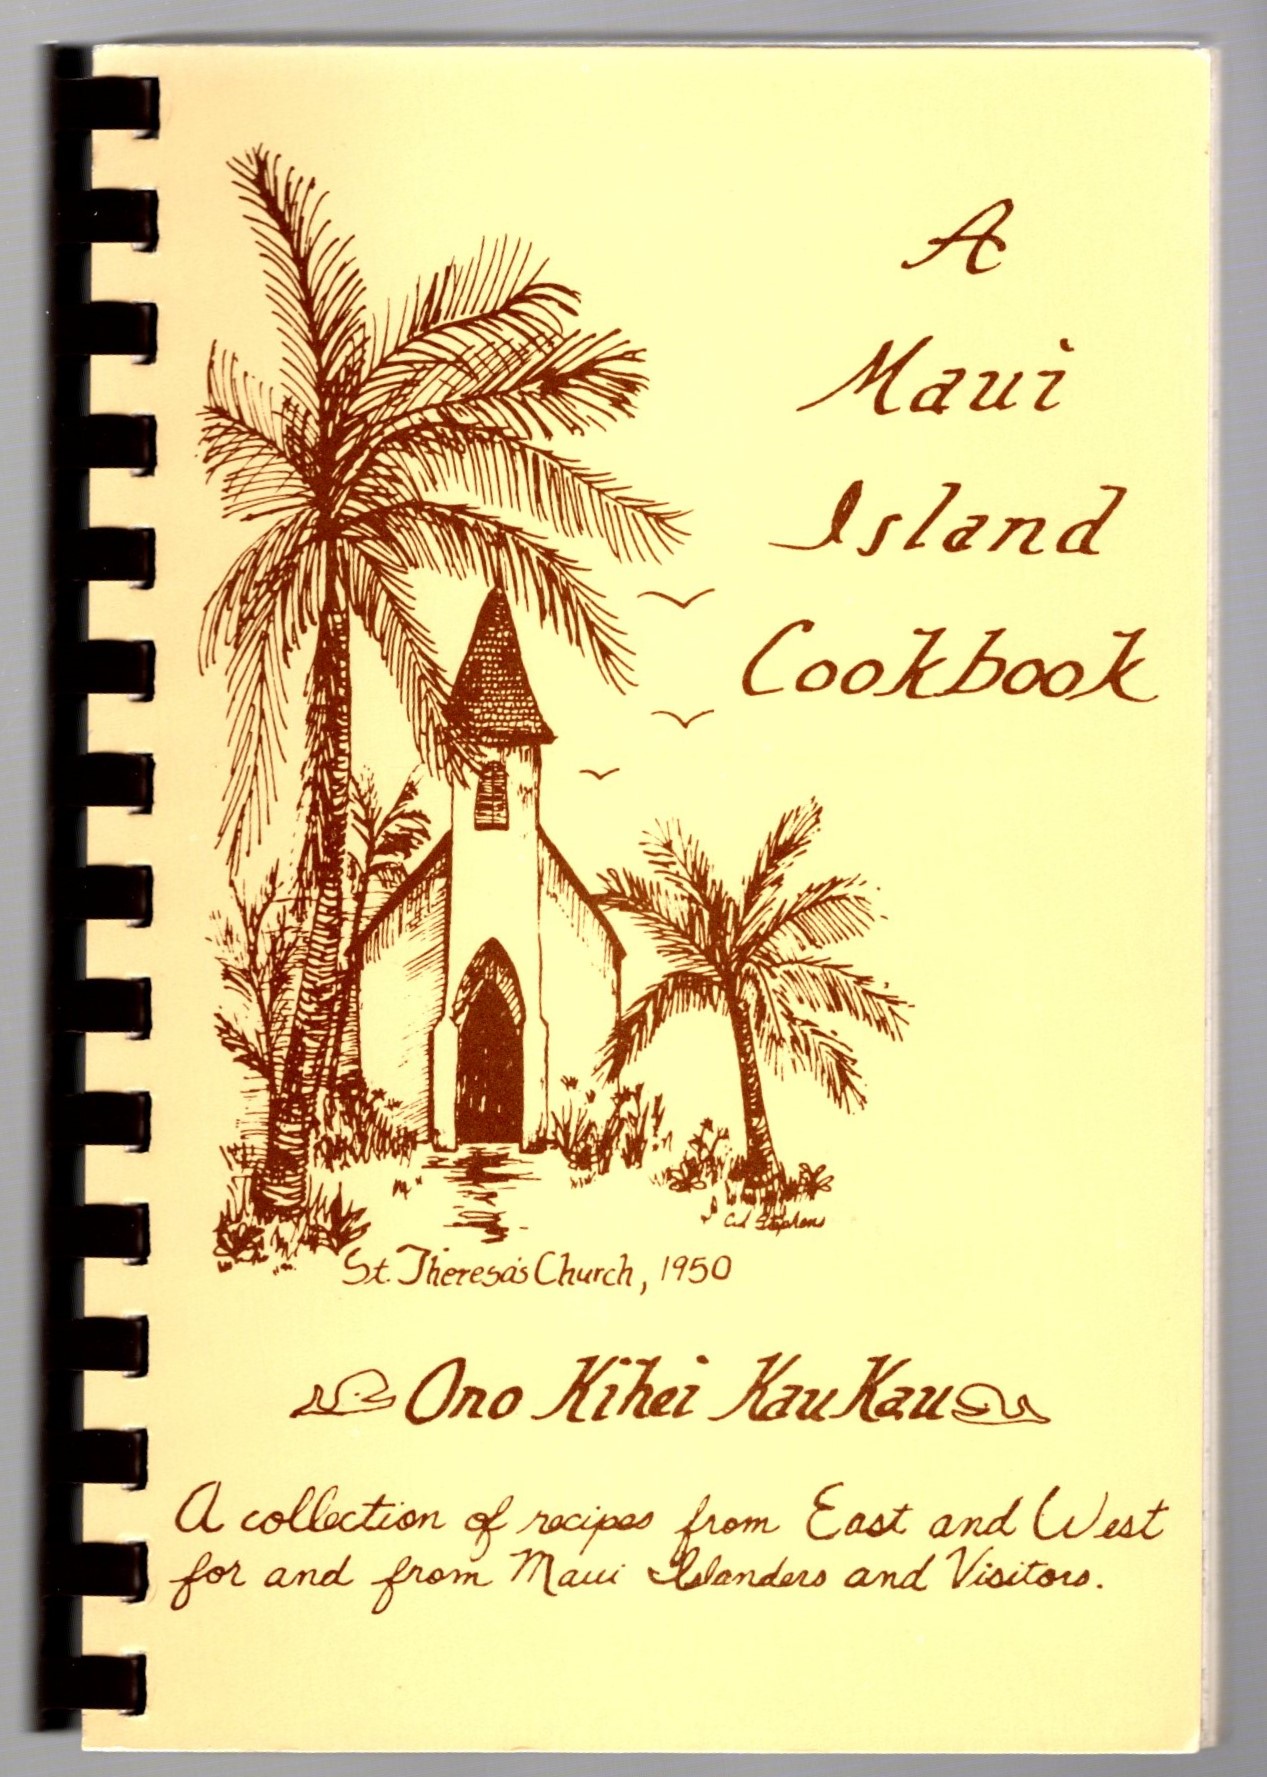 Image for Maui Island Cookbook, Ono Kihei Kau Kau :  A Collection of Recipes from East and West for and from Maui Islanders and Visitors